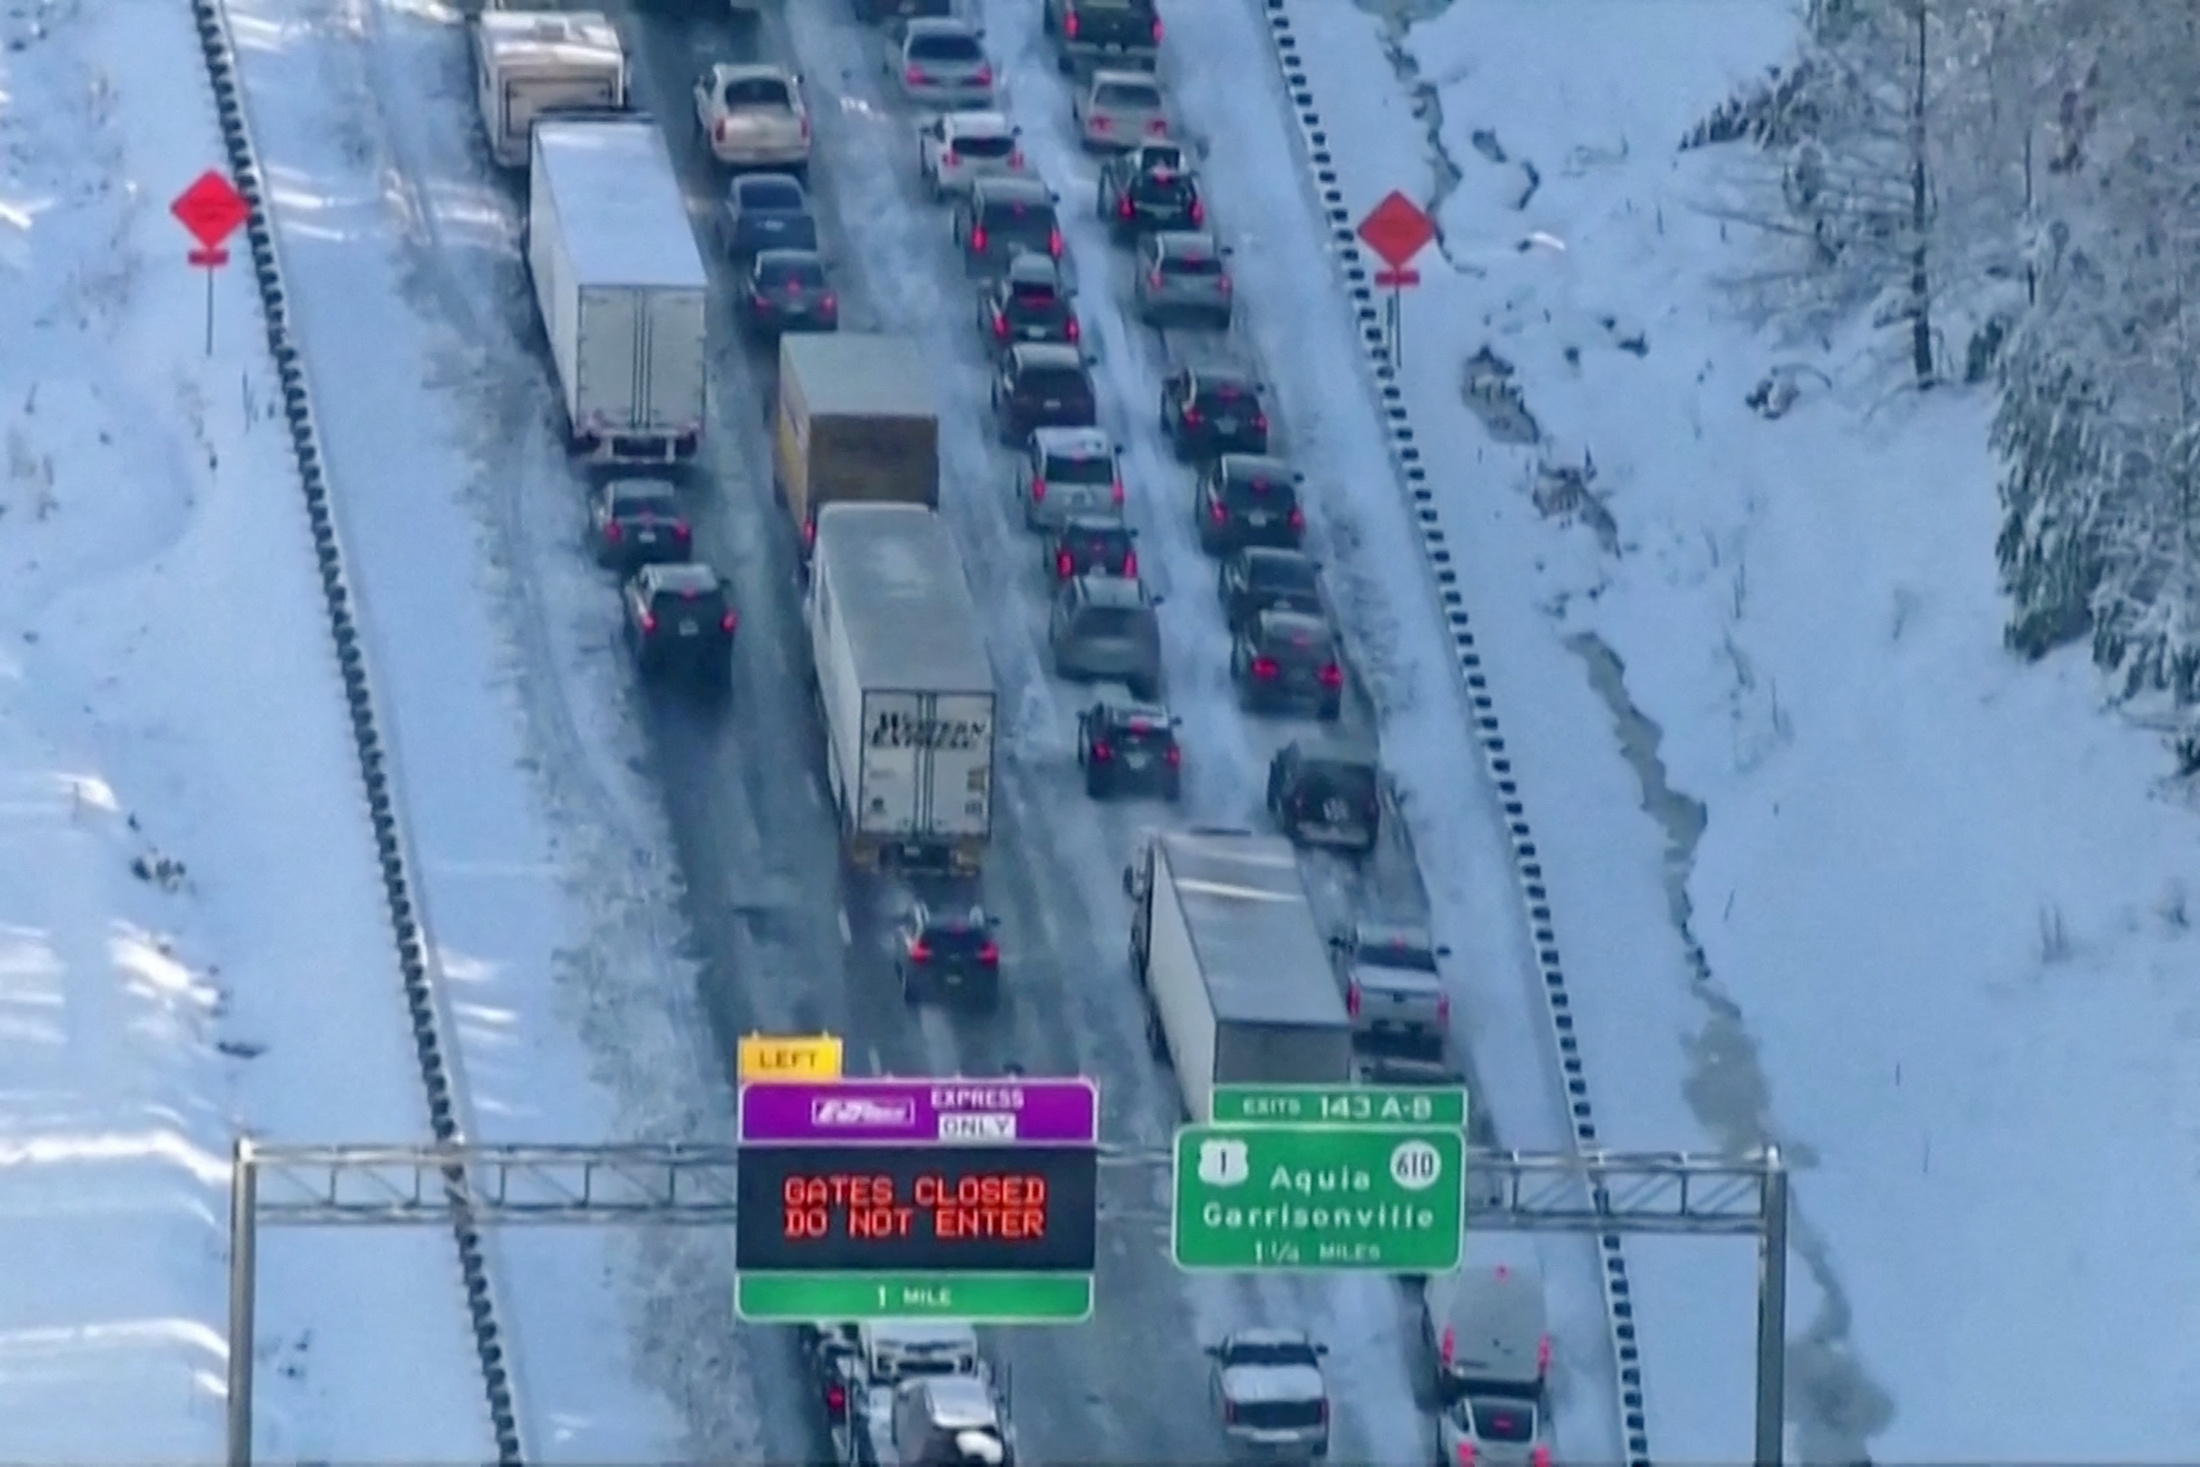 Vehicles are seen in a still image from video as authorities worked to reopen an icy stretch of Interstate 95 closed after a storm blanketed the U.S. region in snow a day earlier, near Garrisonville, Virginia, U.S. January 4, 2022.  ABC/WJLA via REUTERS   